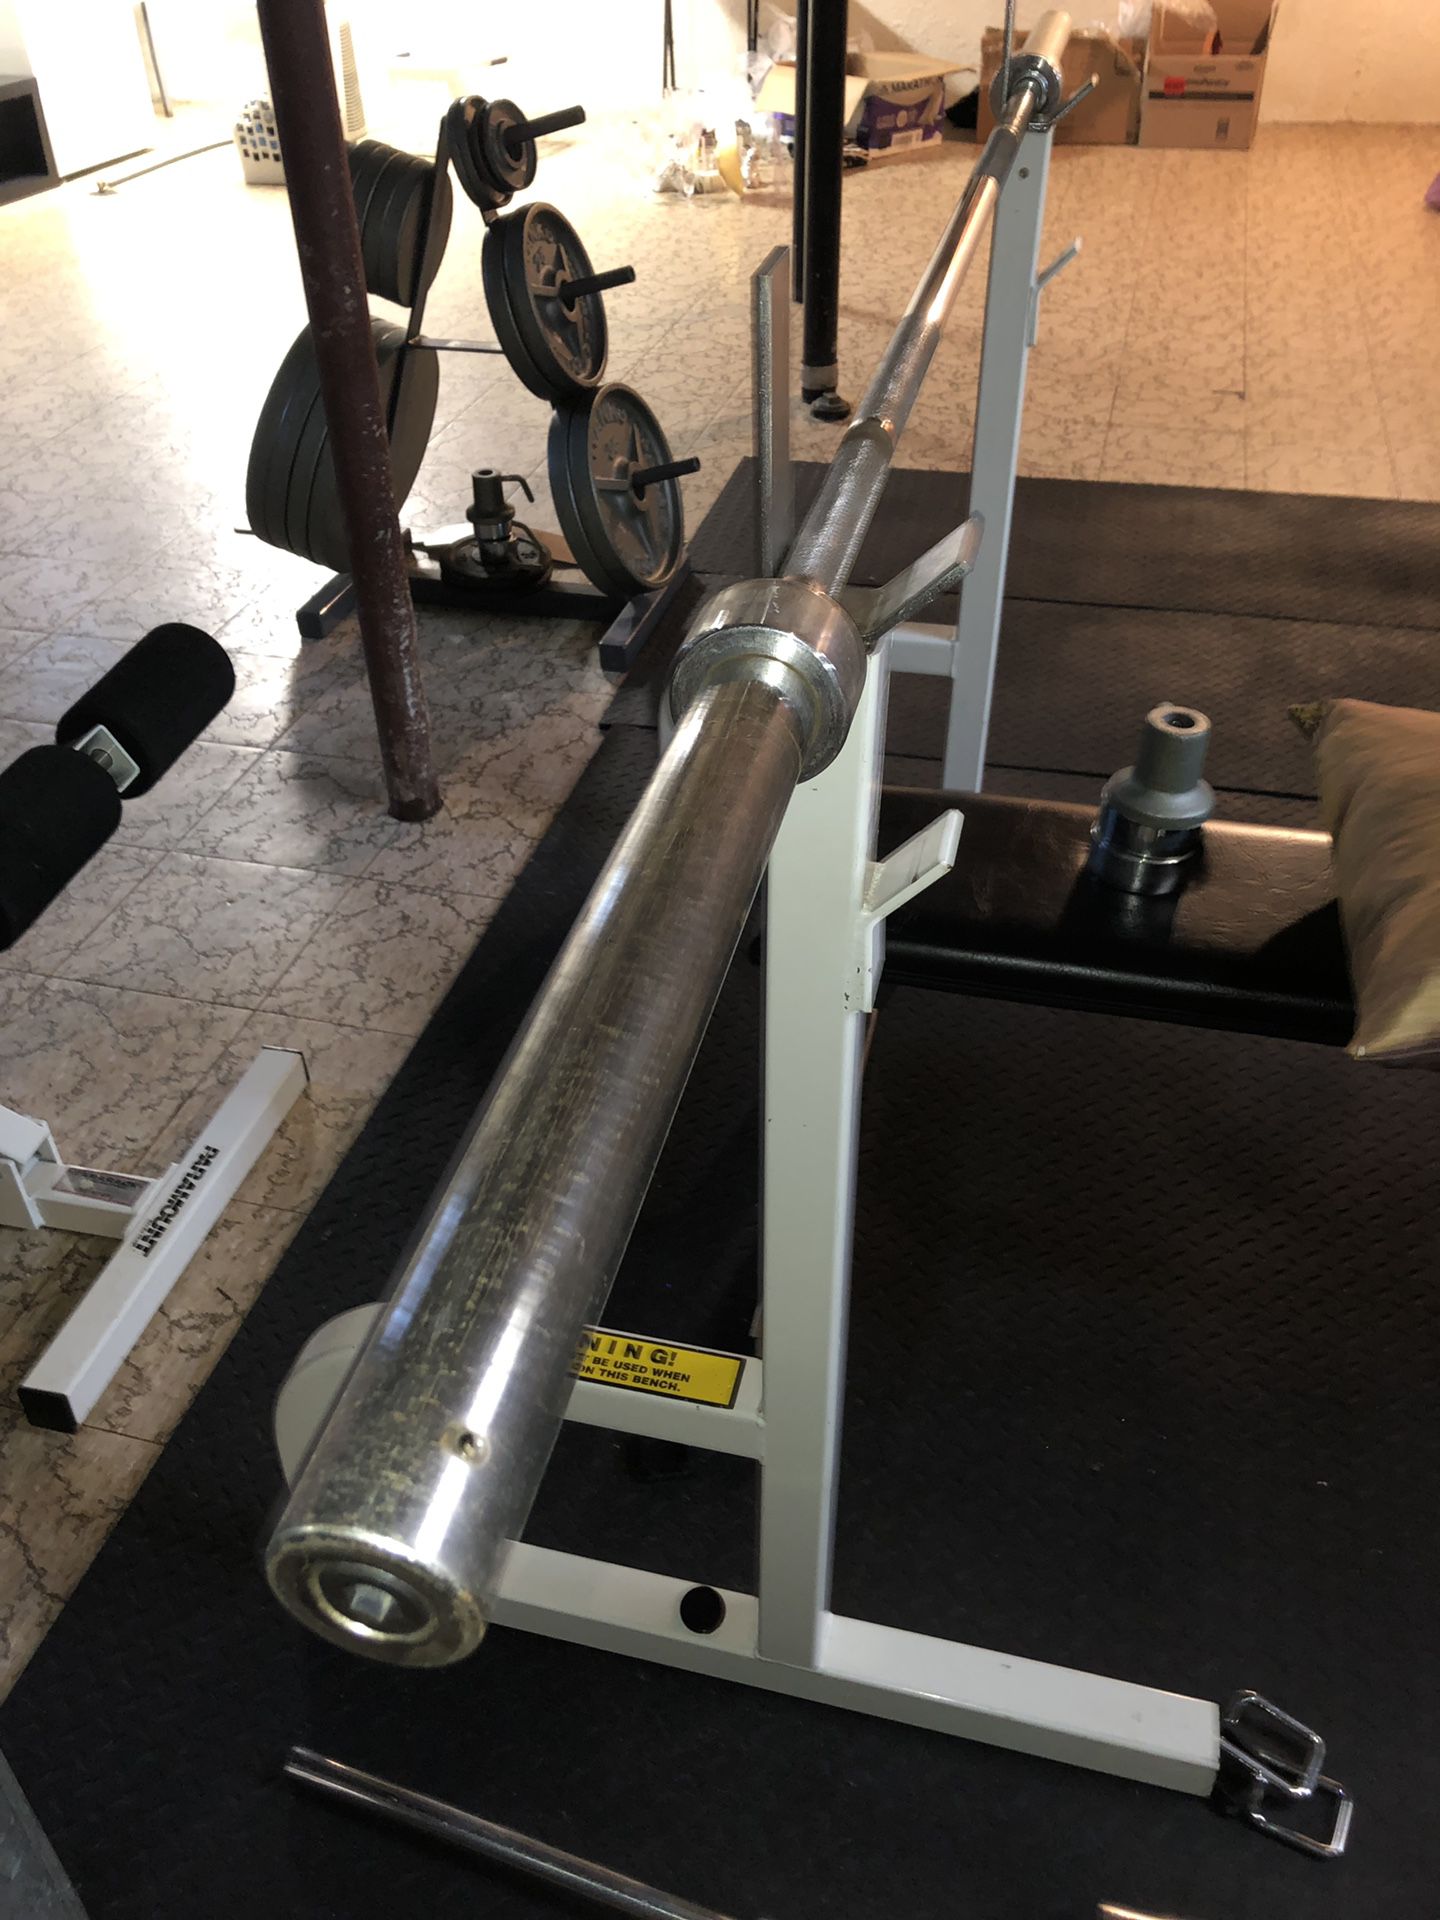 Ivanko olympic bar + Paramount bench with rack